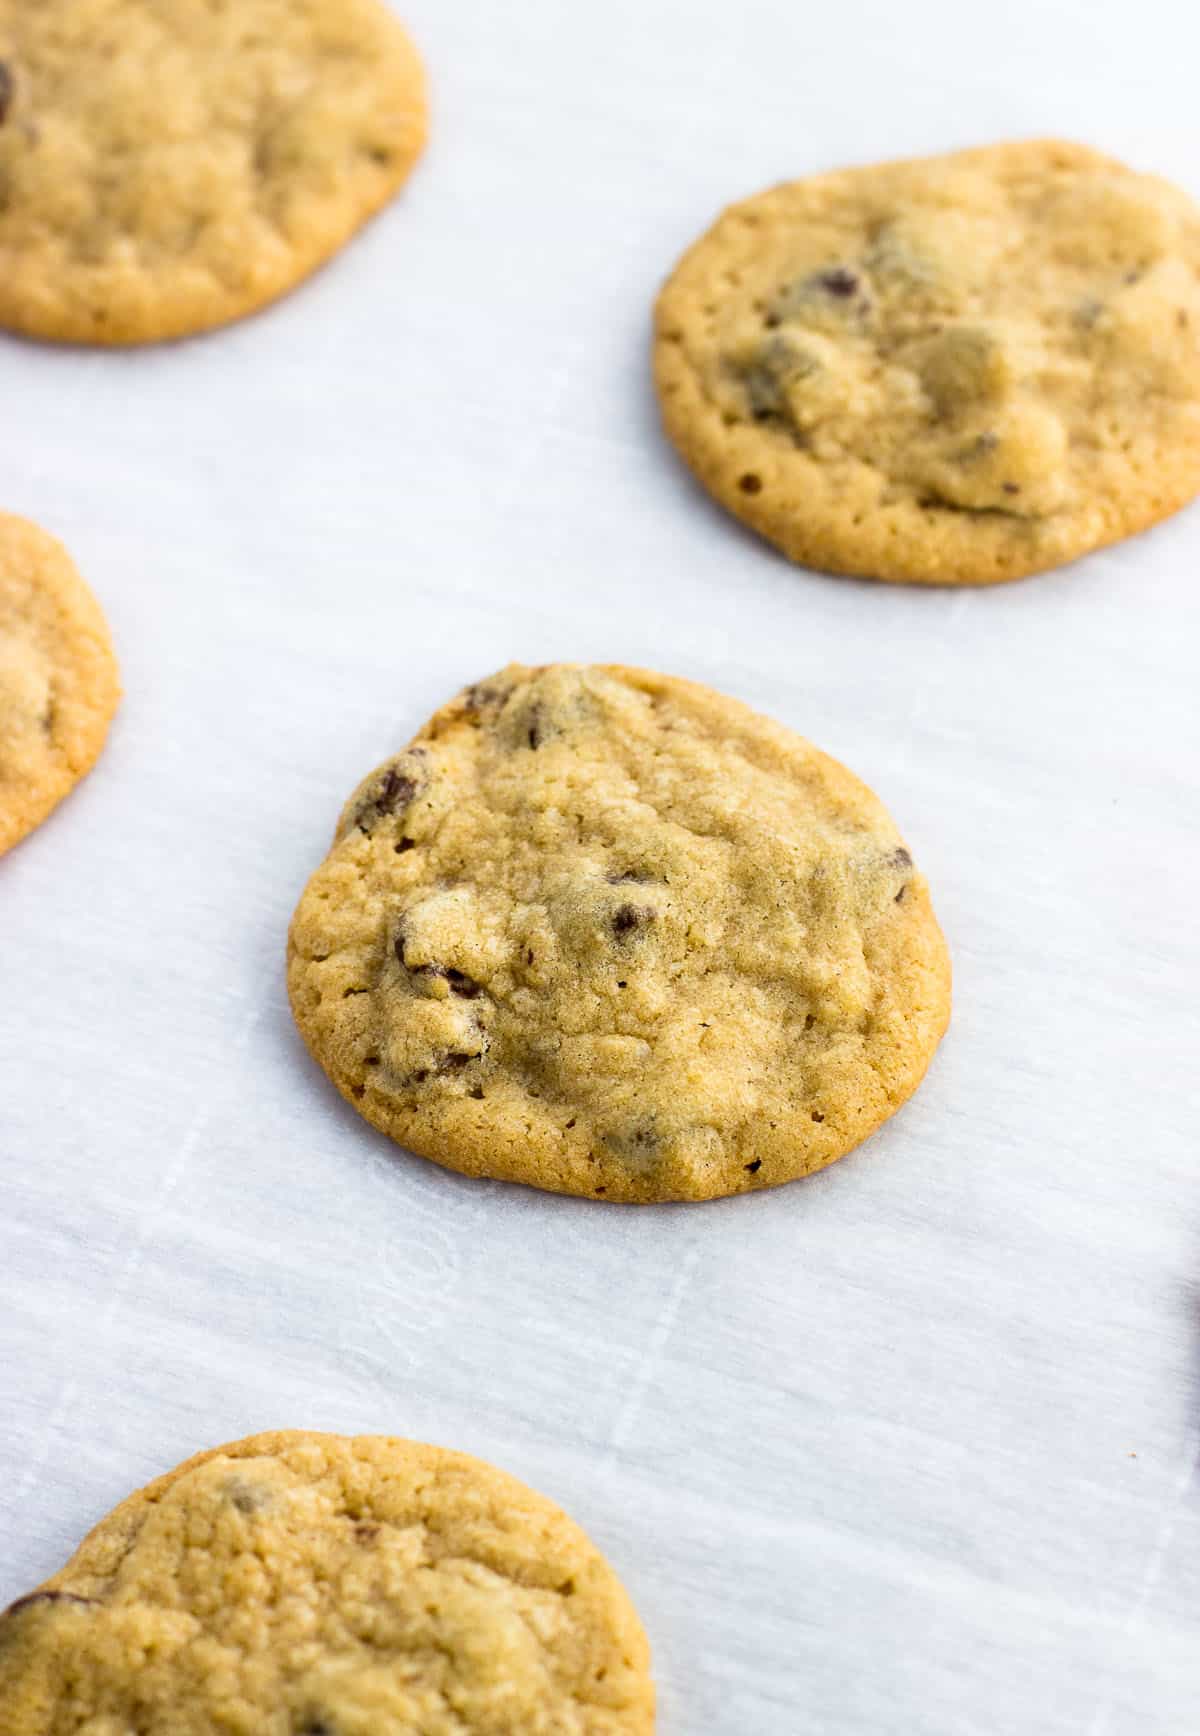 Baked chocolate chip cookies on a parchment-lined metal baking sheet